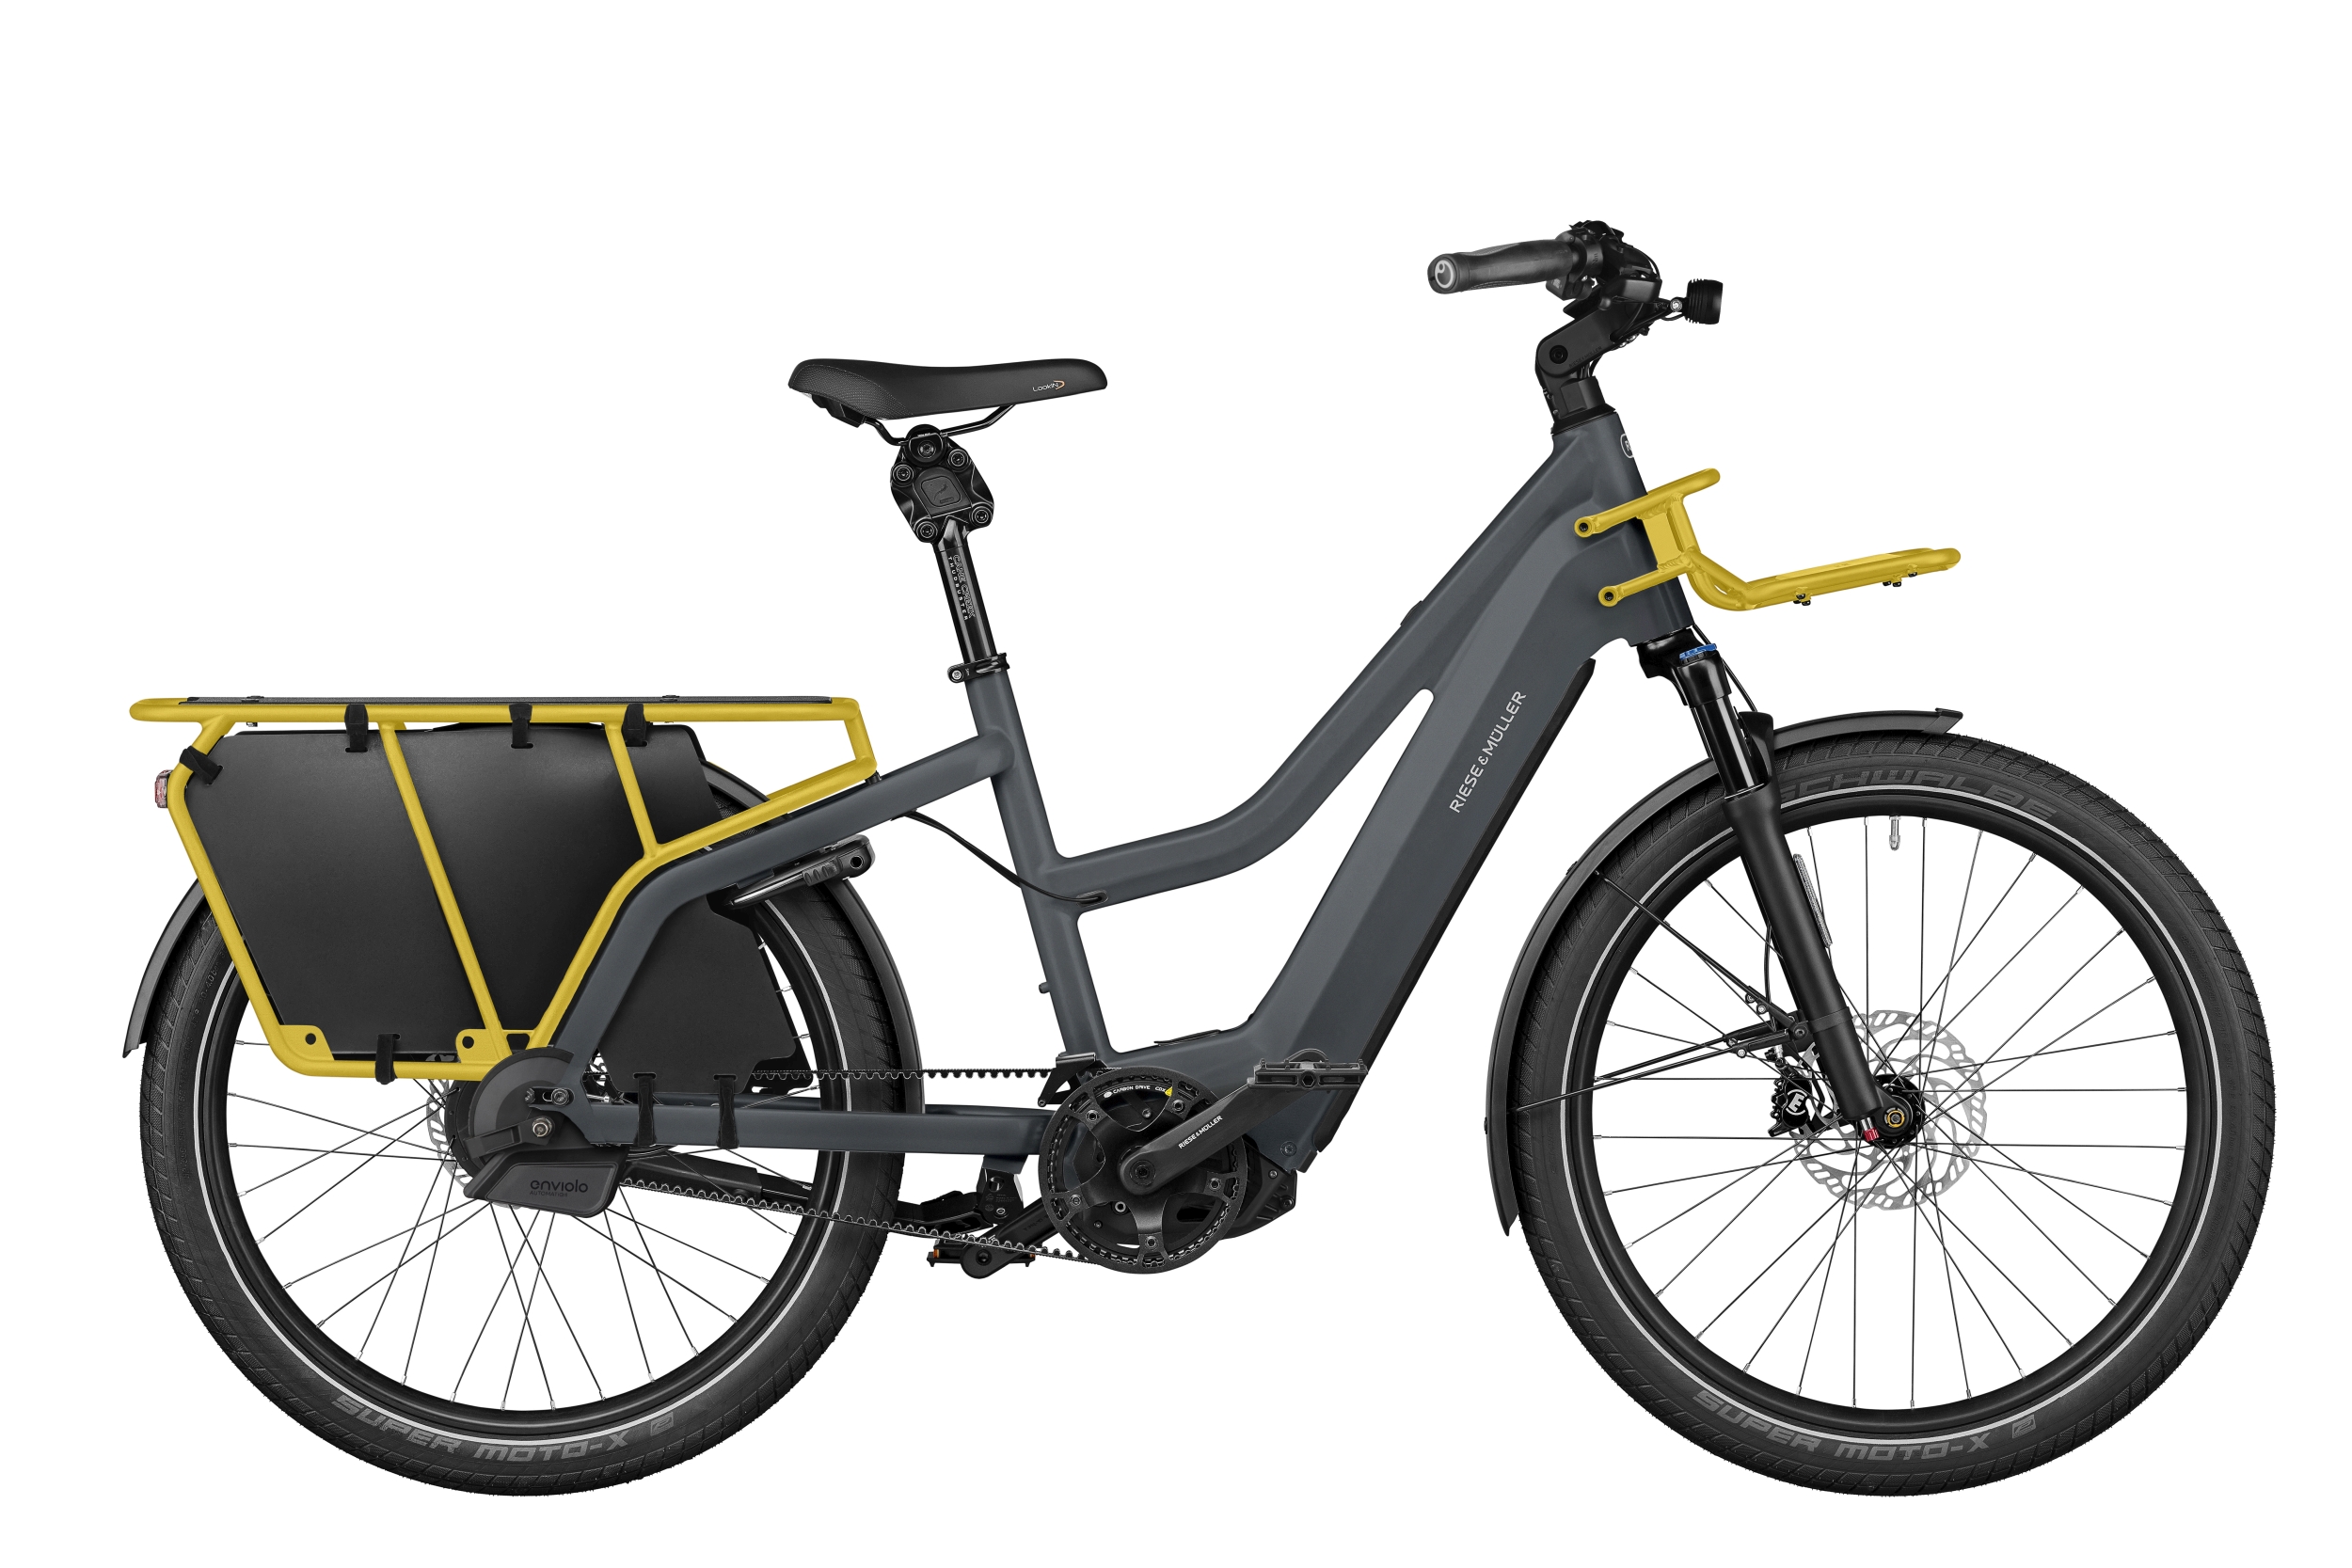 Riese&Müller Multicharger GT vario,750Wh,51cm,RX